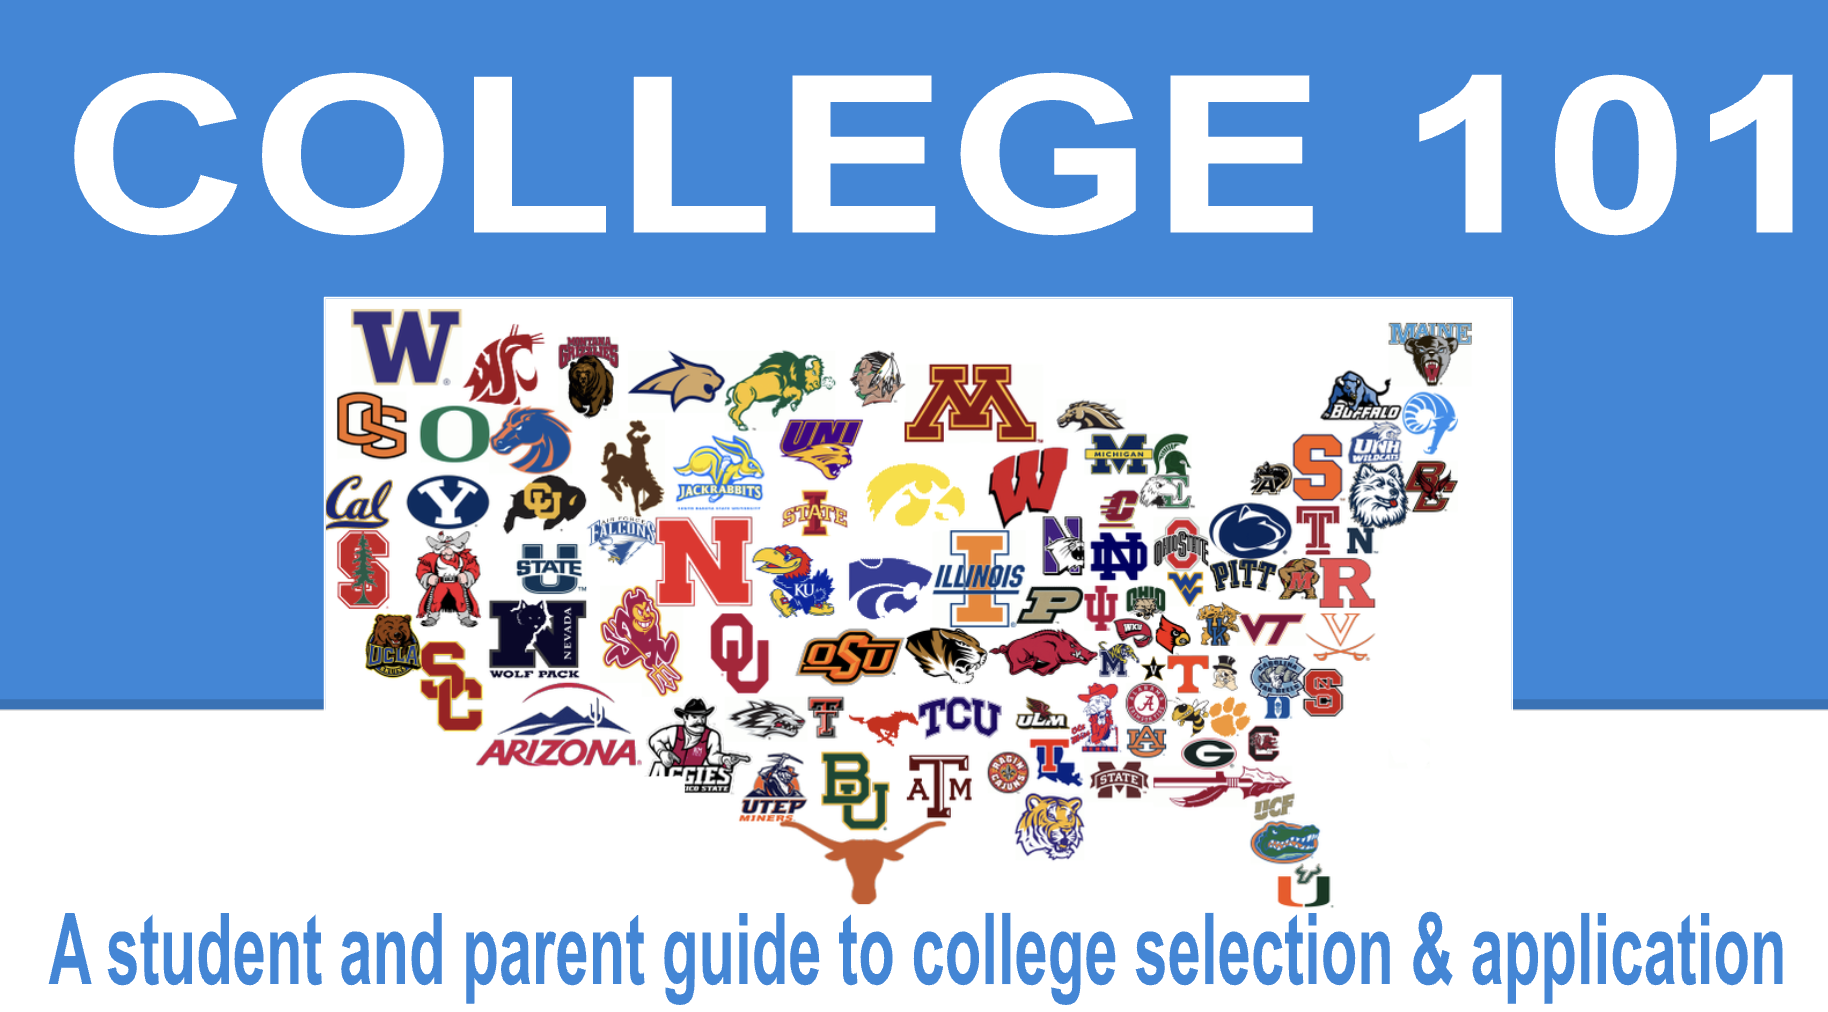 College 101 - A student and parent guide to college selection & application